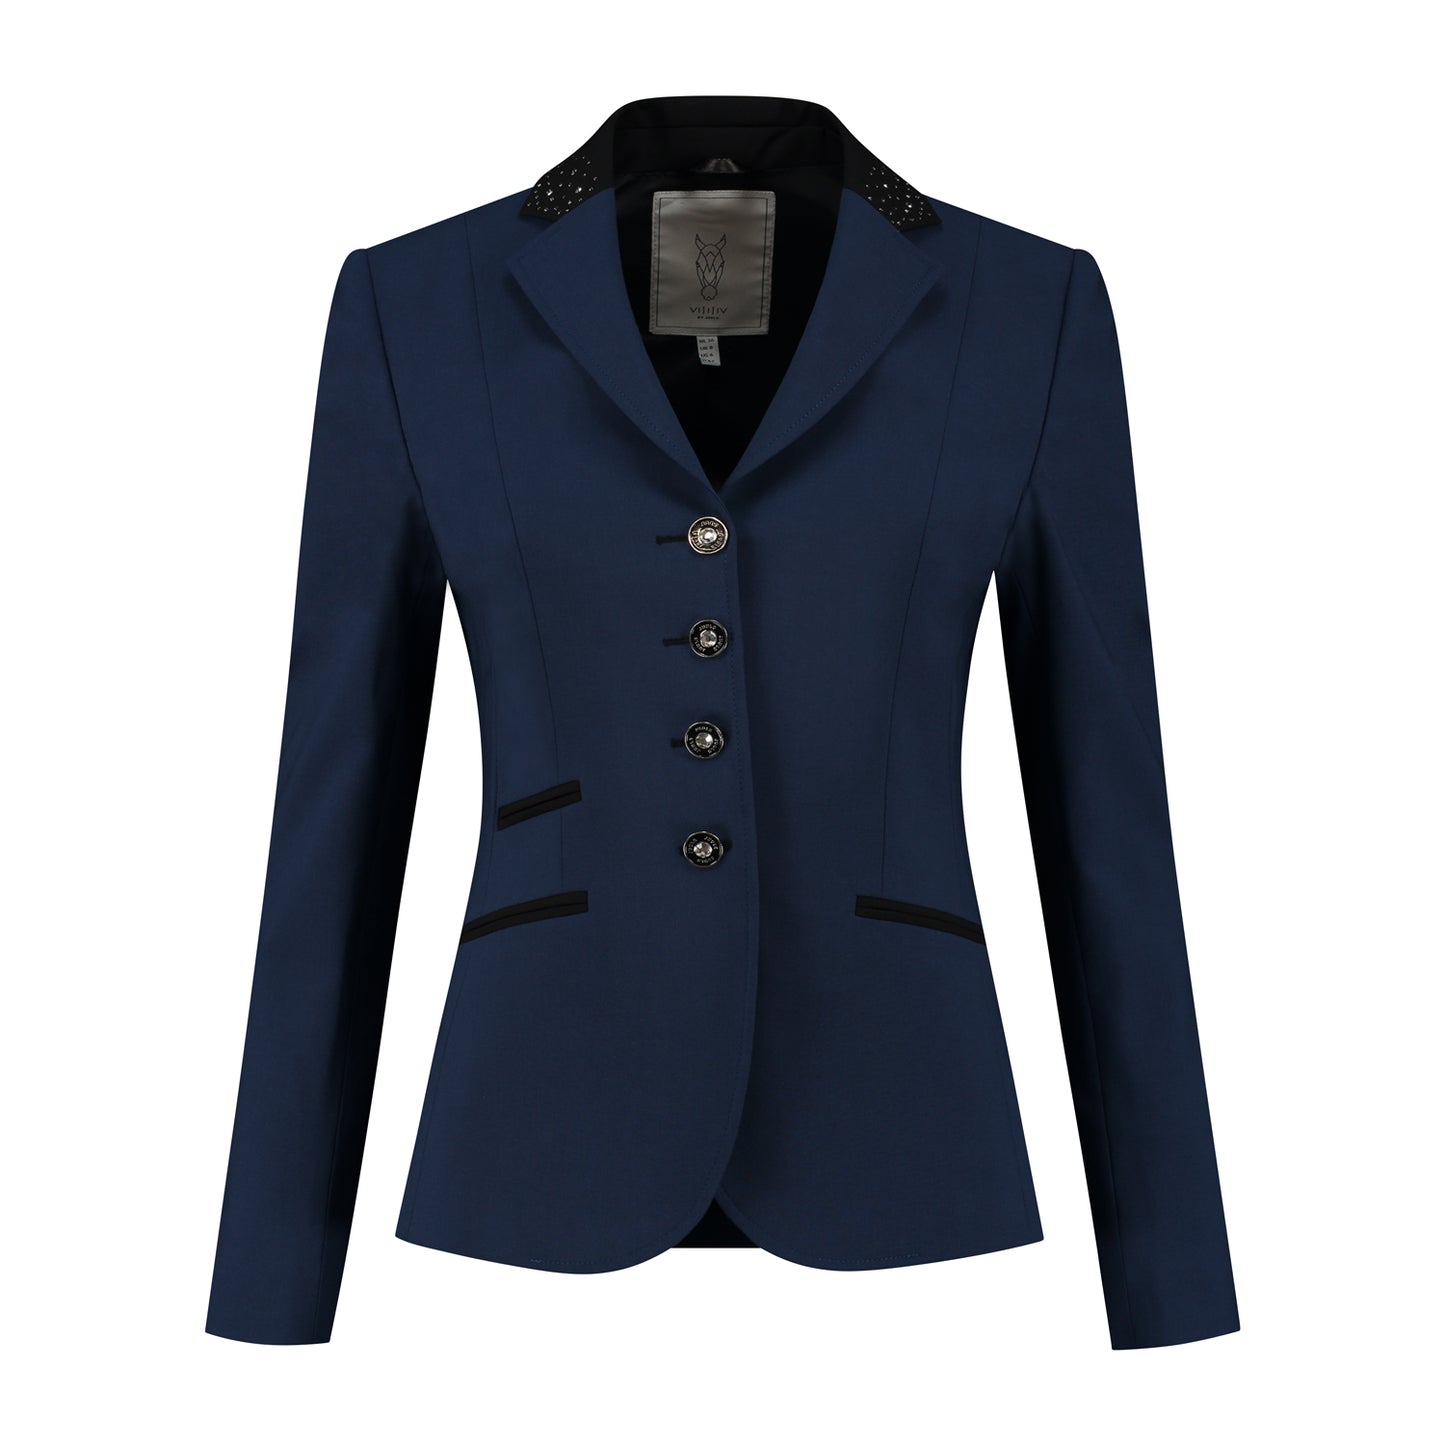 Competition jacket - Royal blue